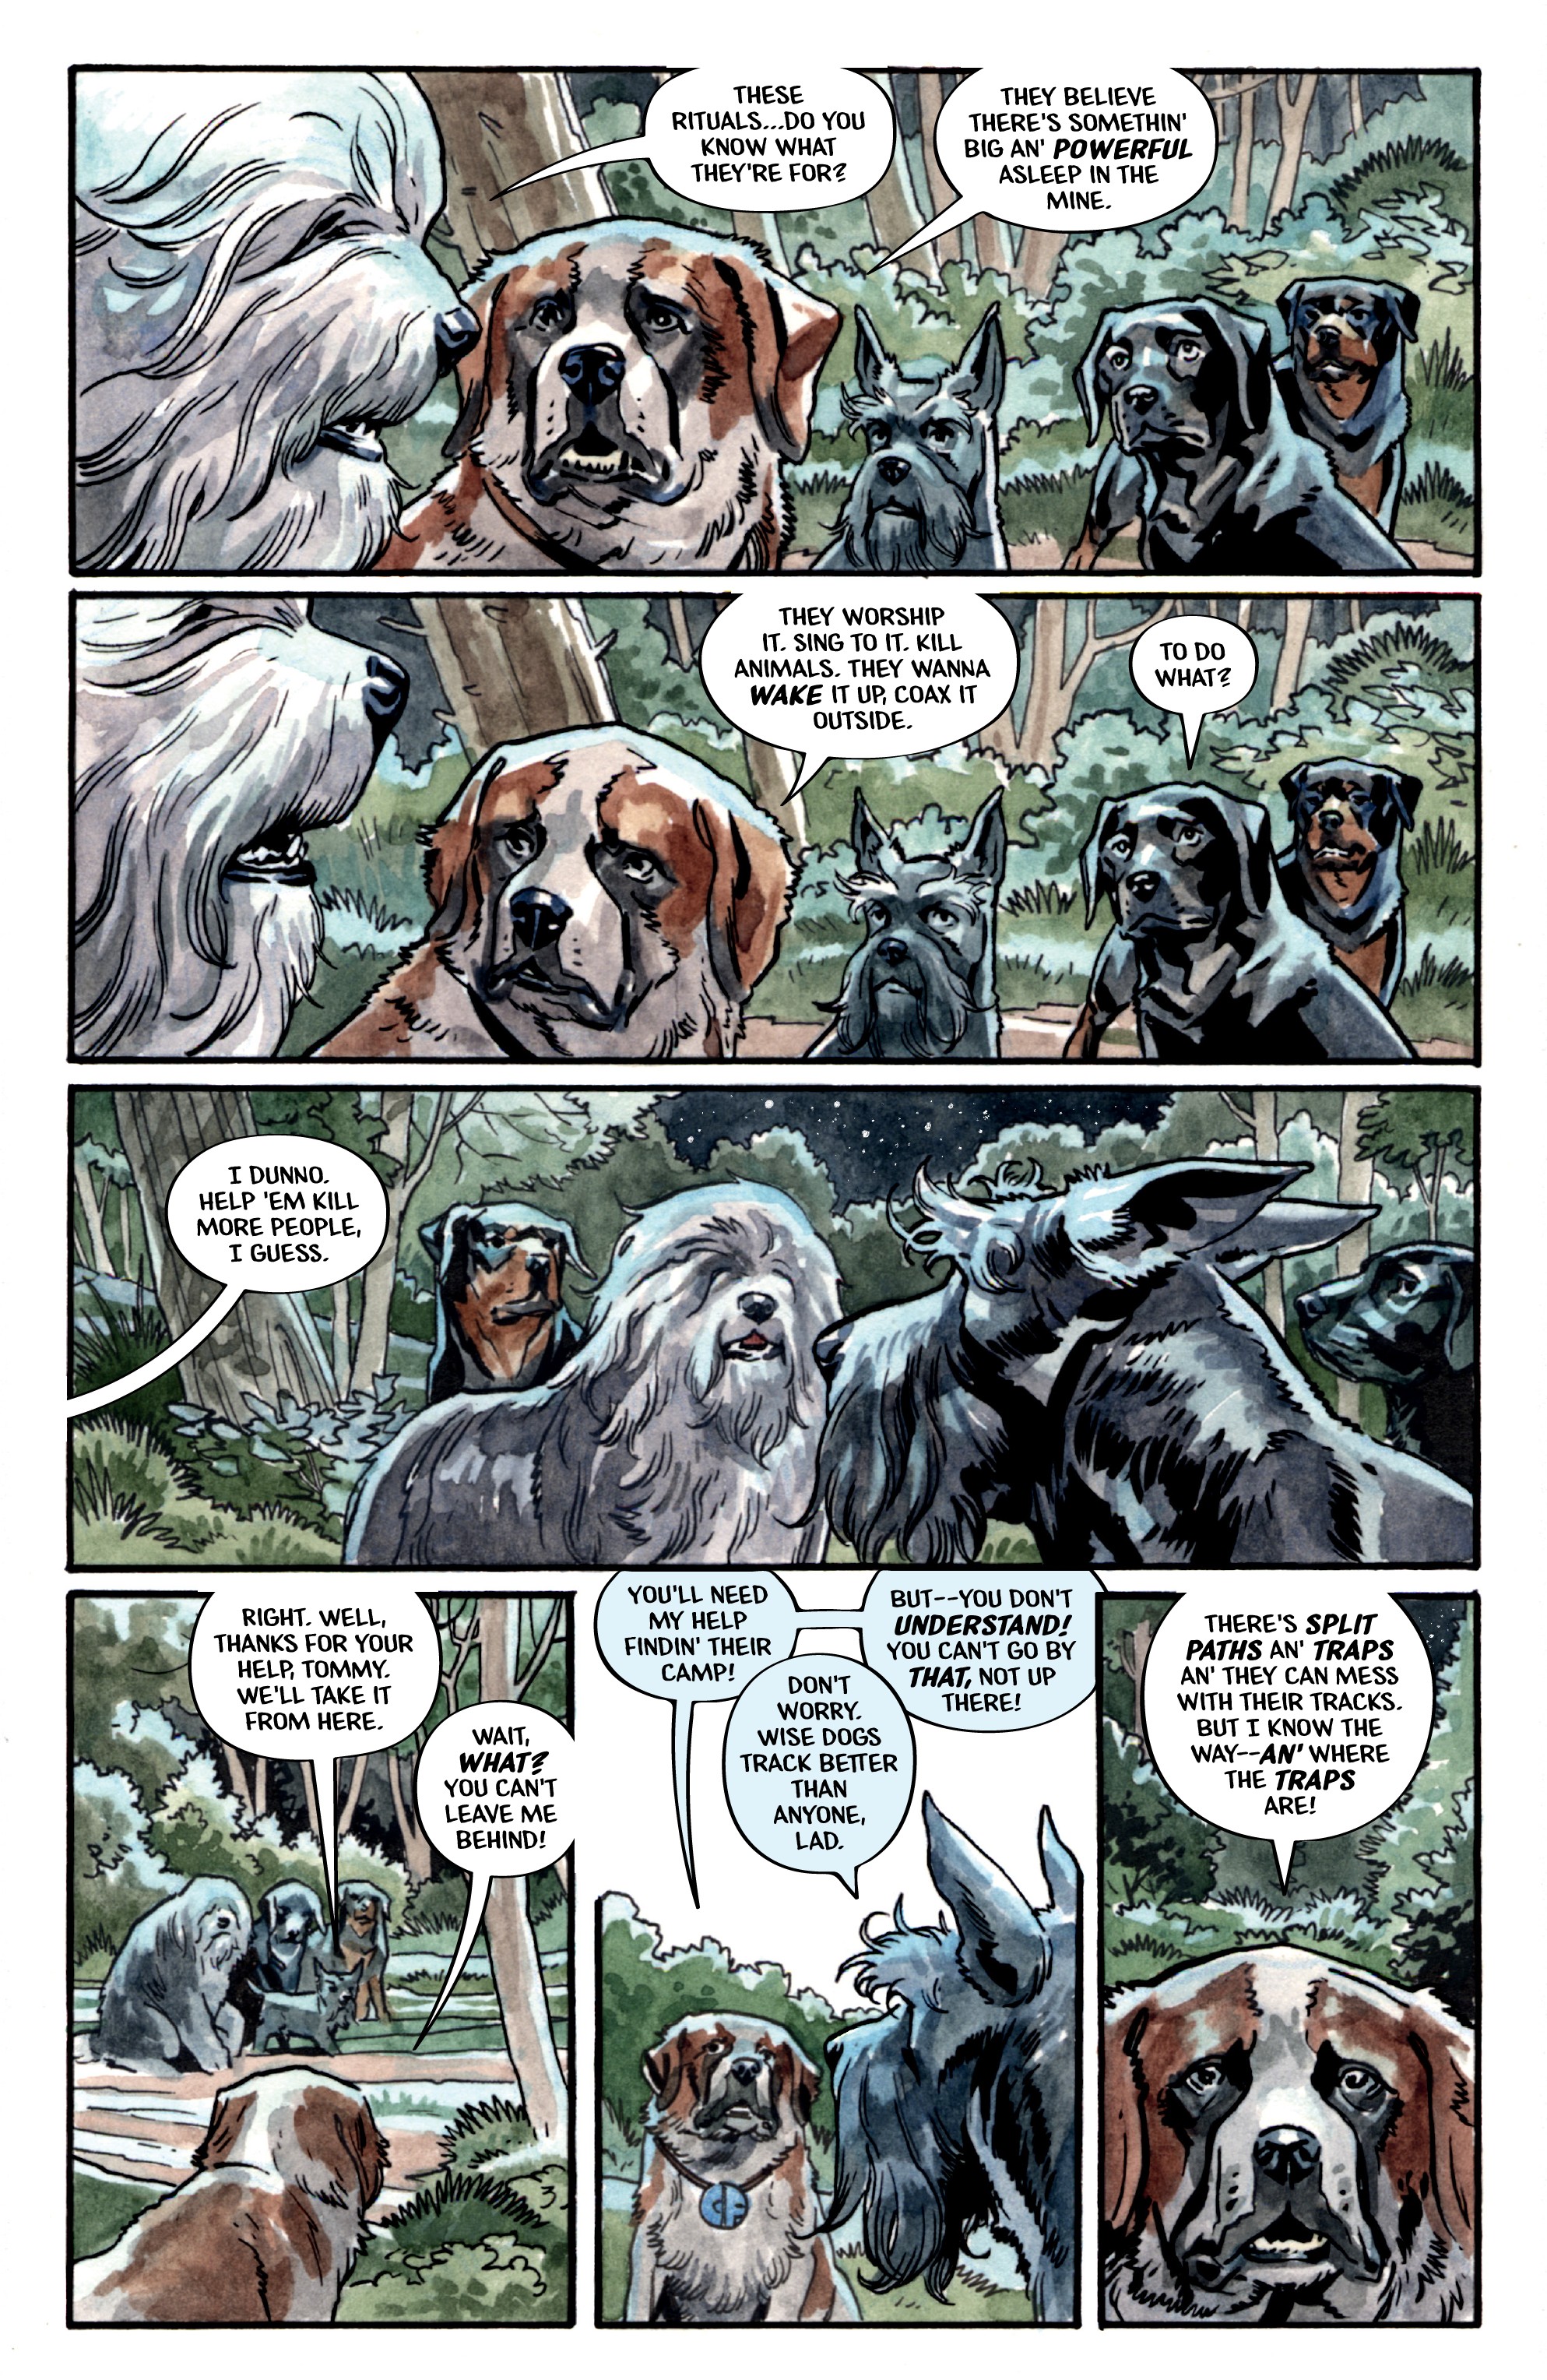 Beasts of Burden: Wise Dogs and Eldritch Men  (2018-): Chapter 3 - Page 5